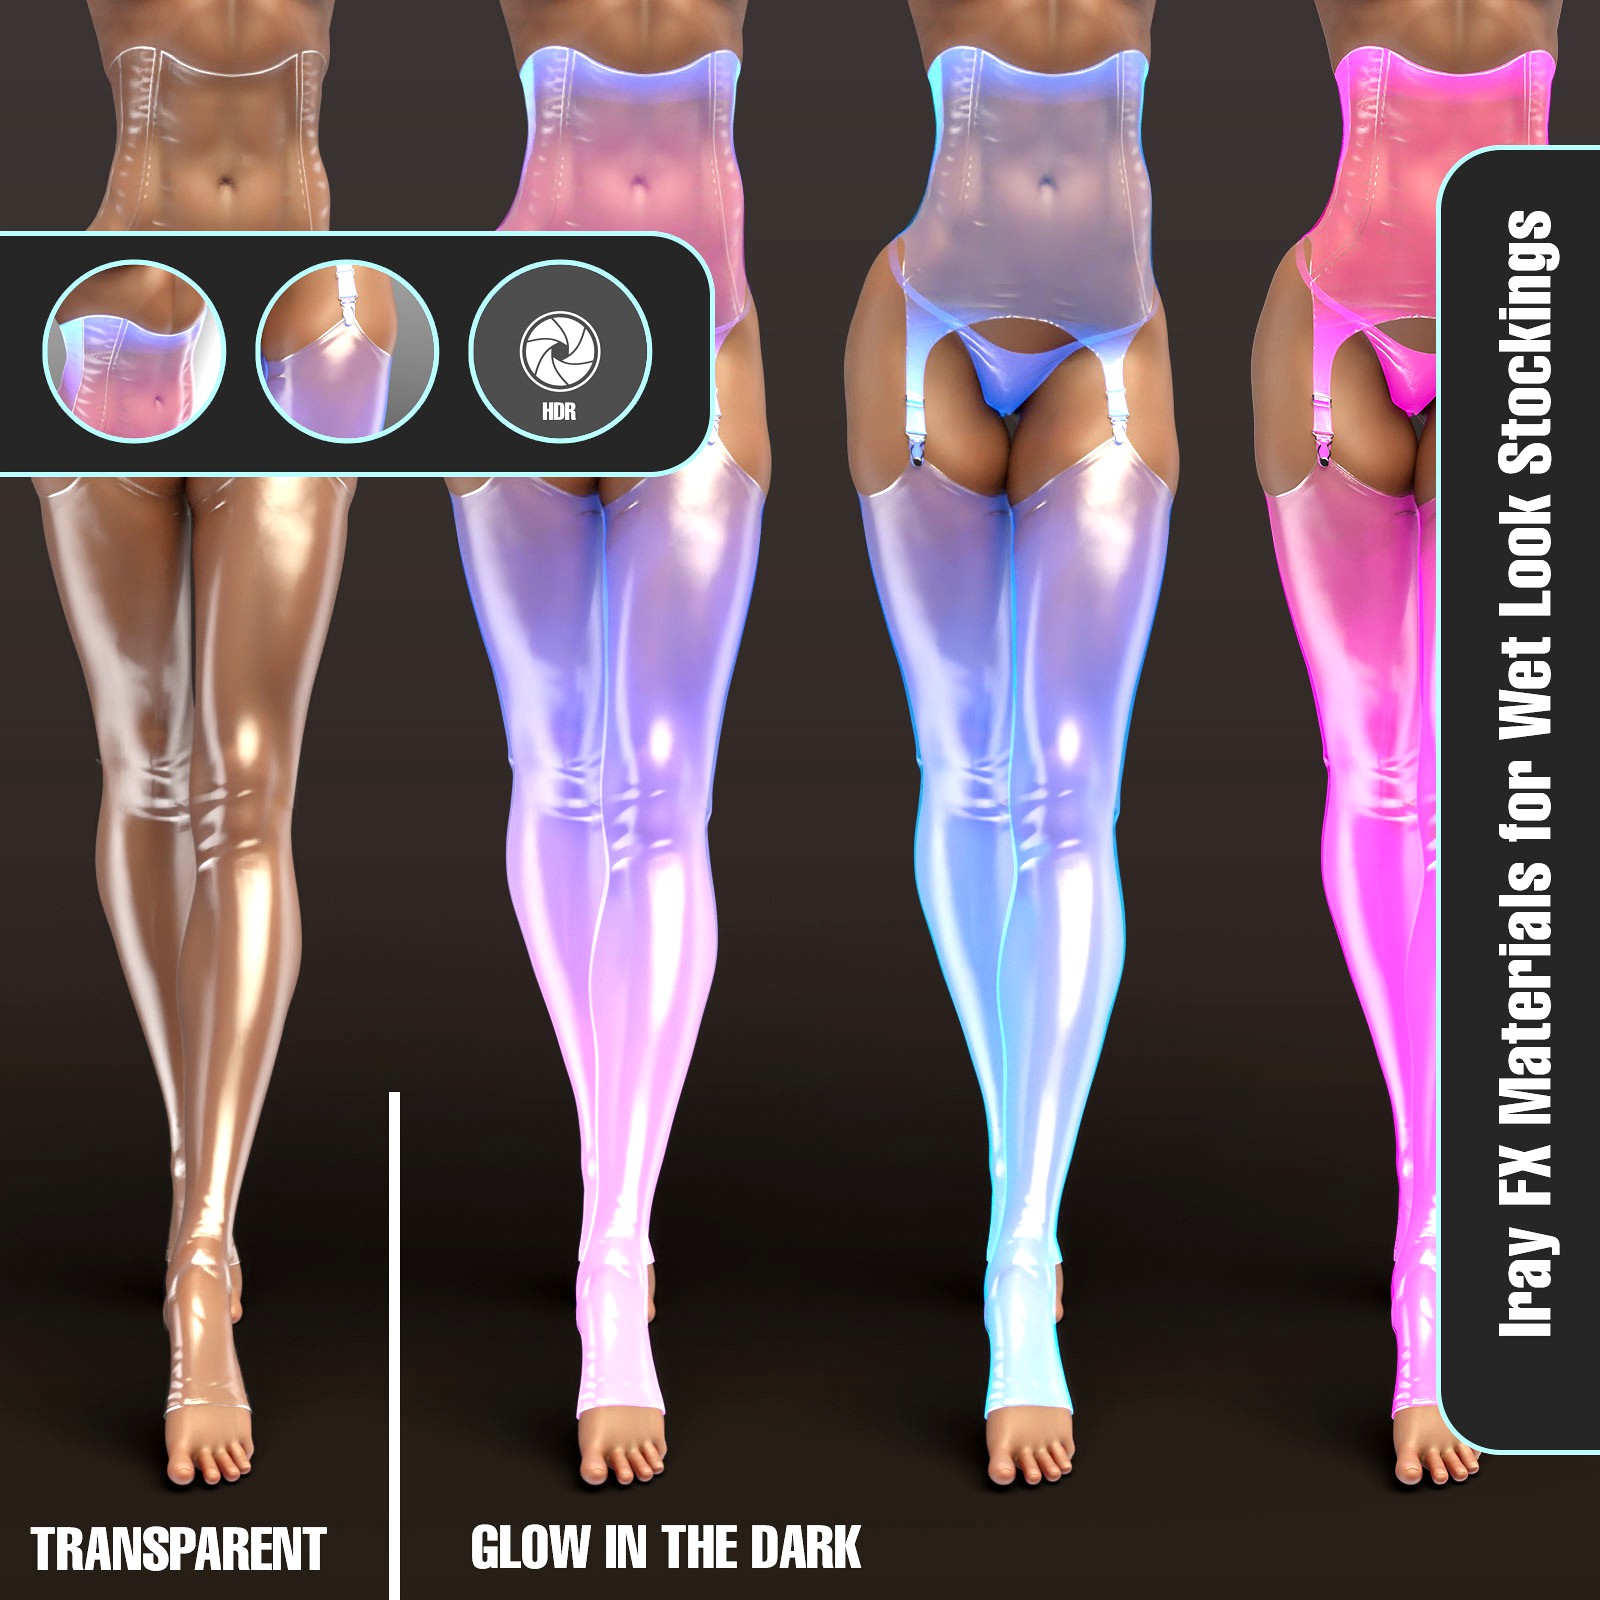 Iray FX Material Addon for Wet Look Stockings